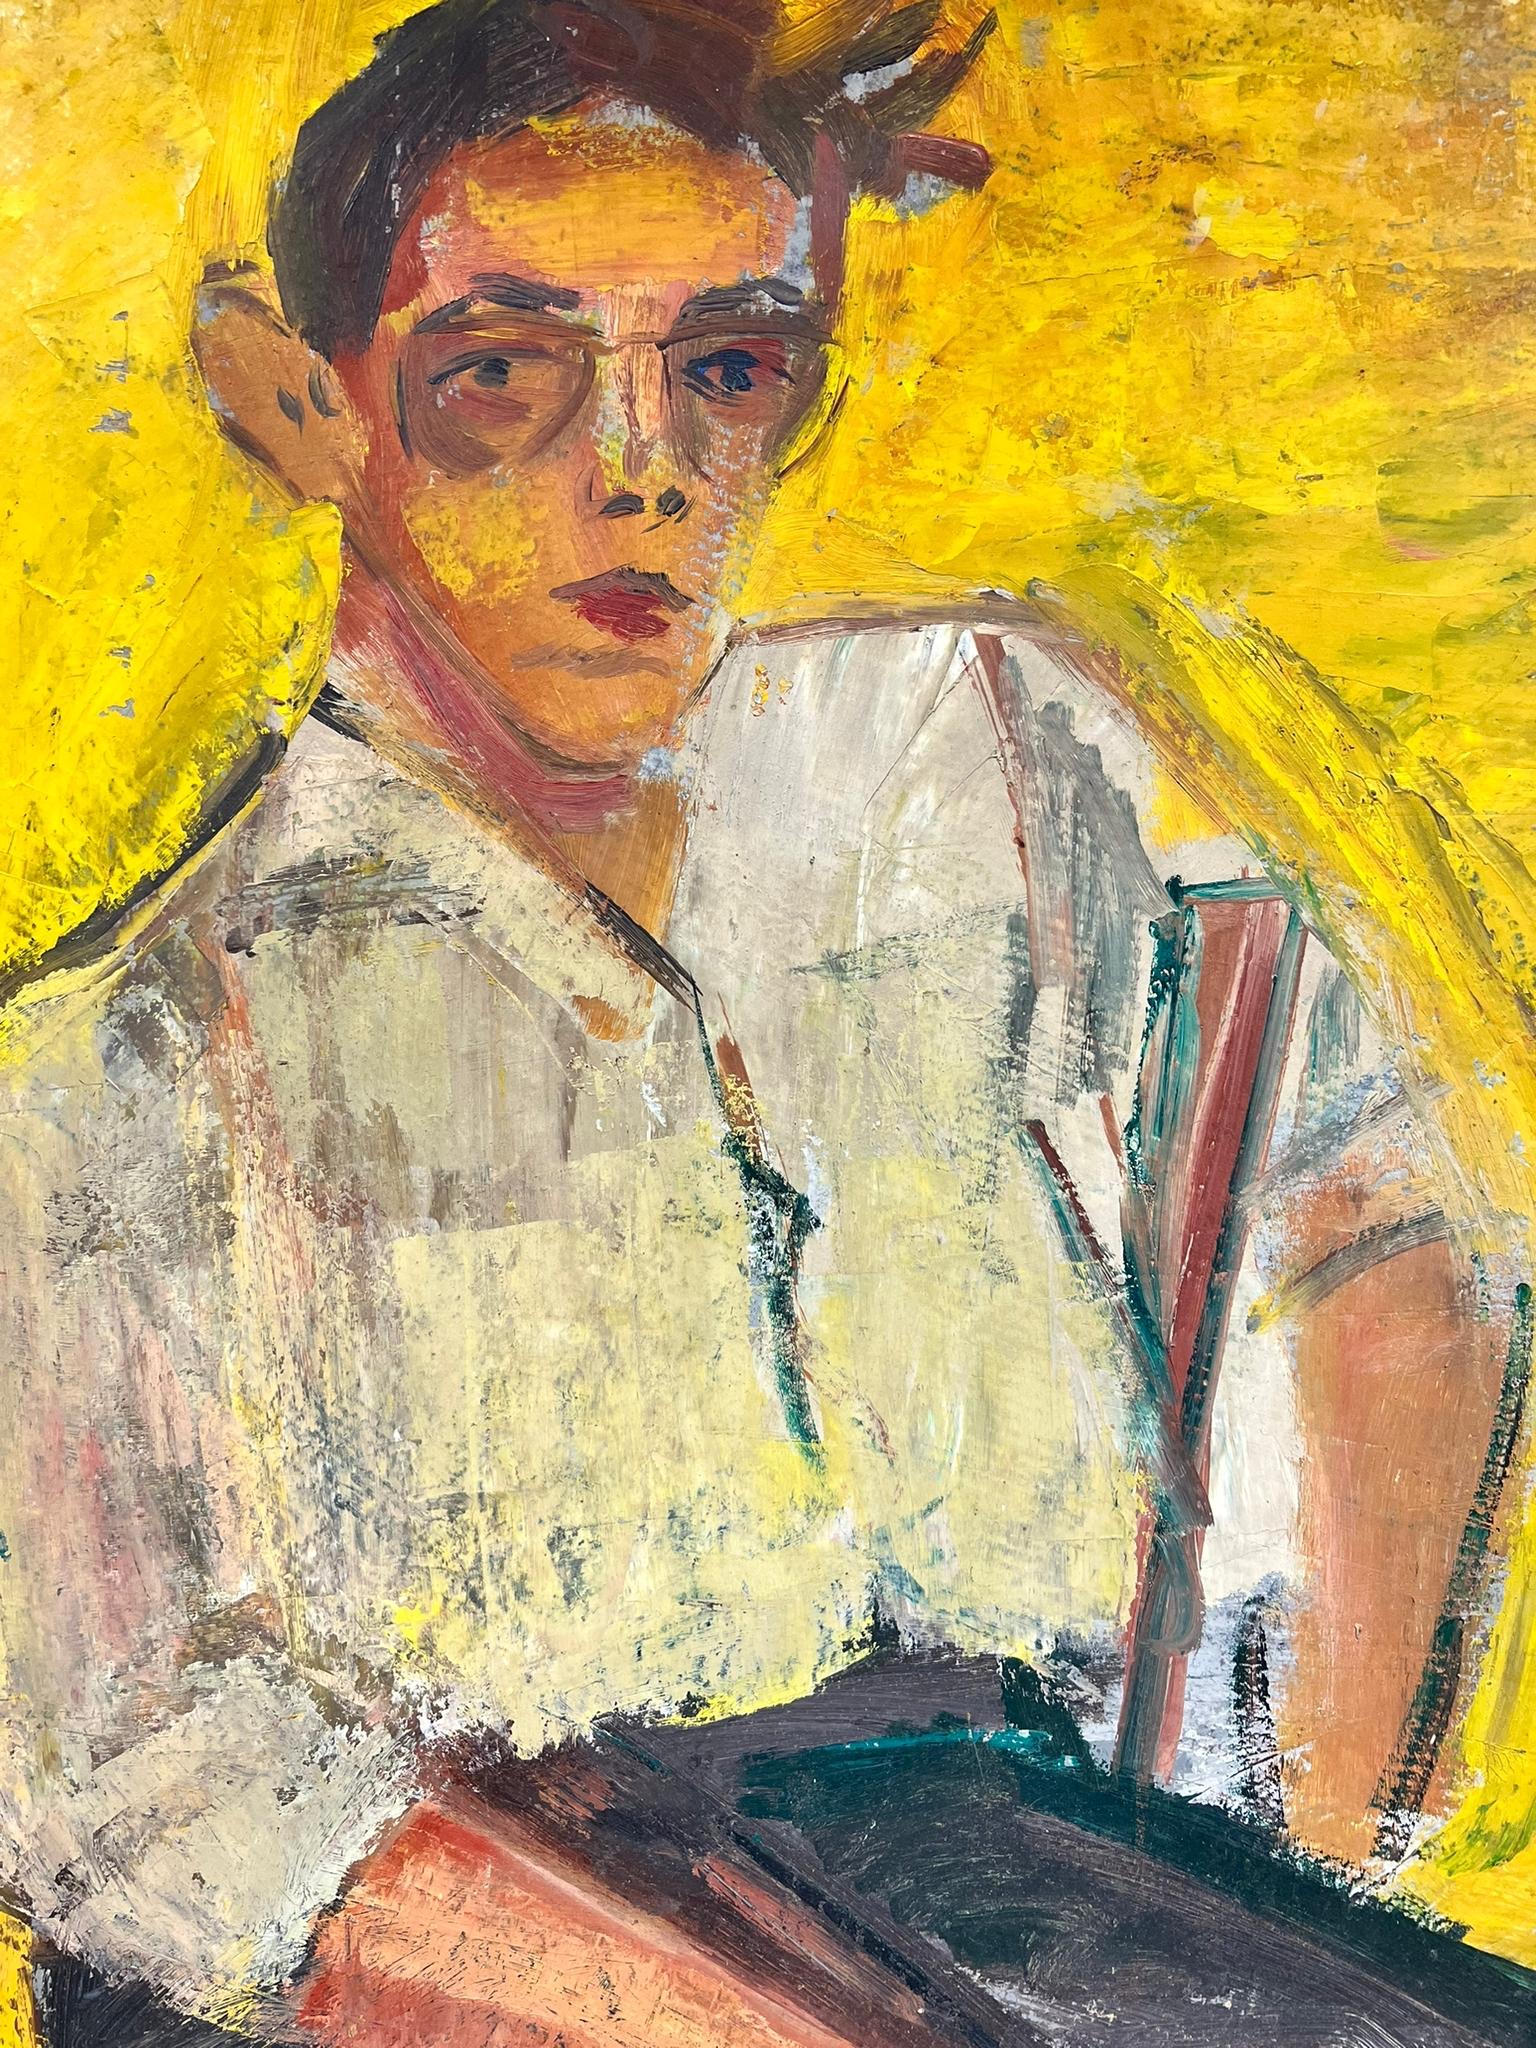 20th Century French Signed Oil Retro Yellow Portrait of A Male with Glasses - Post-Impressionist Painting by Édouard Righetti (1924-2001)